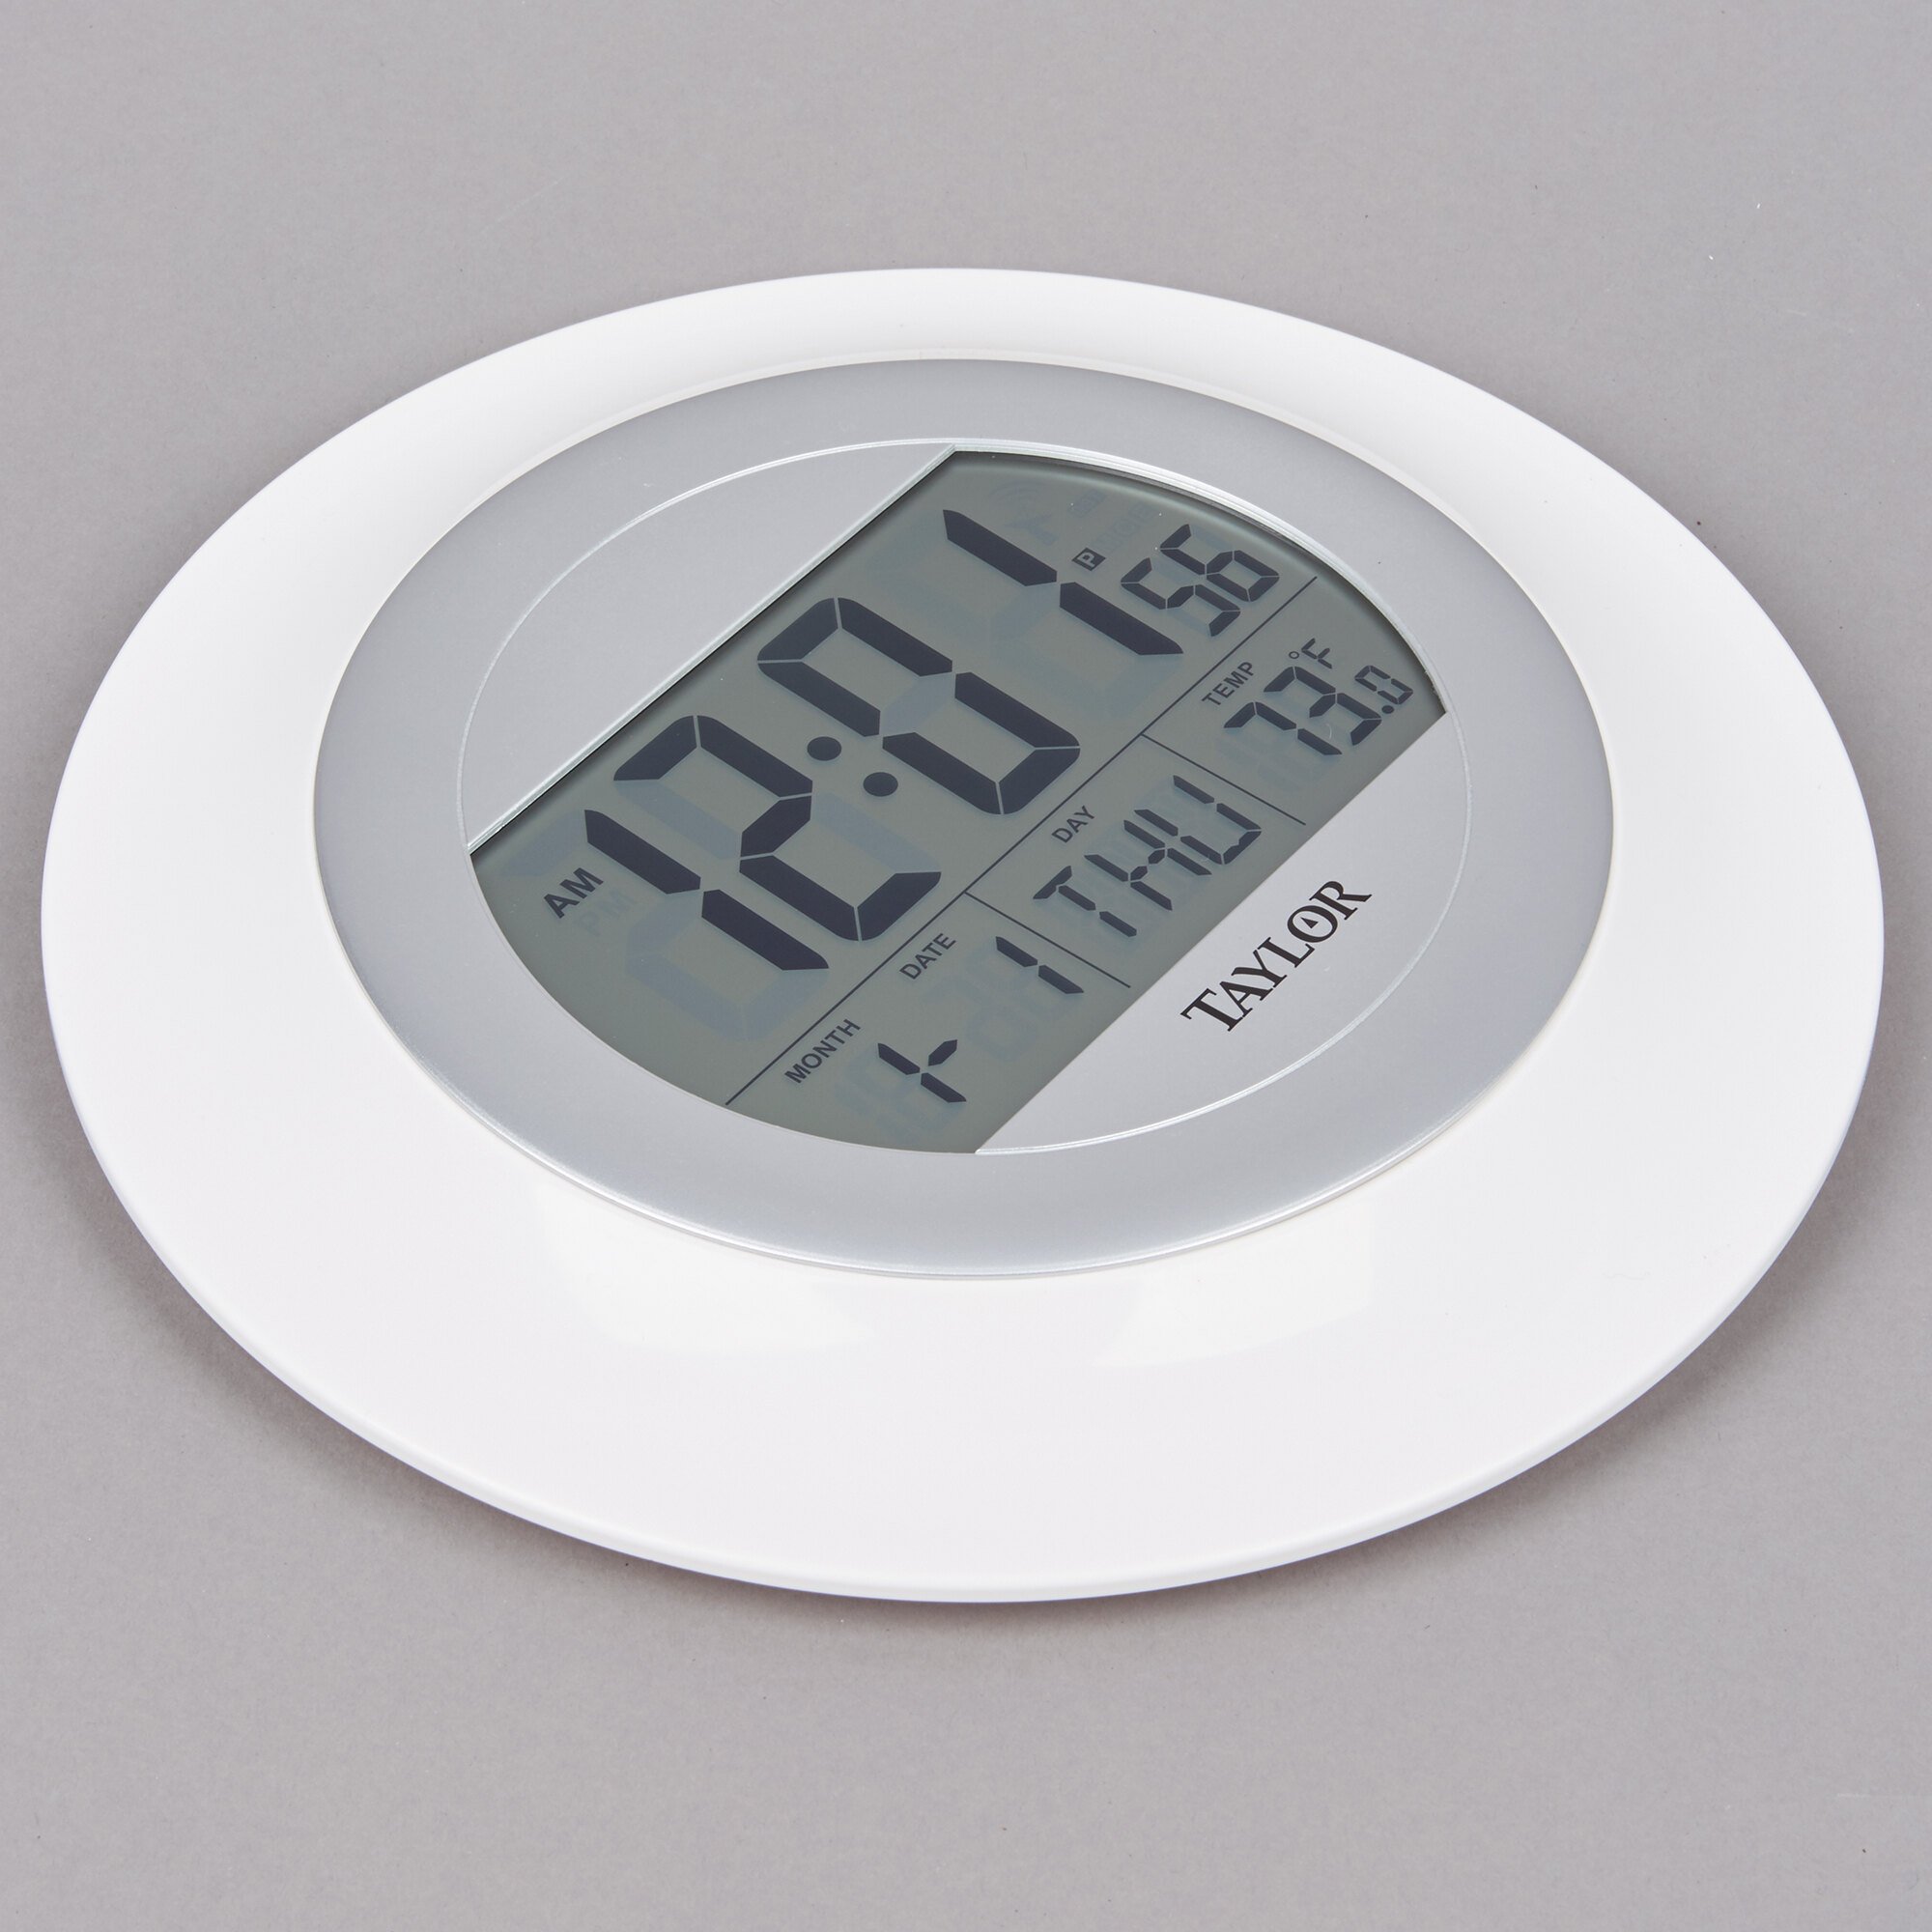 Taylor 1750 9 1/4" White Digital Atomic Wall Clock with Thermometer and